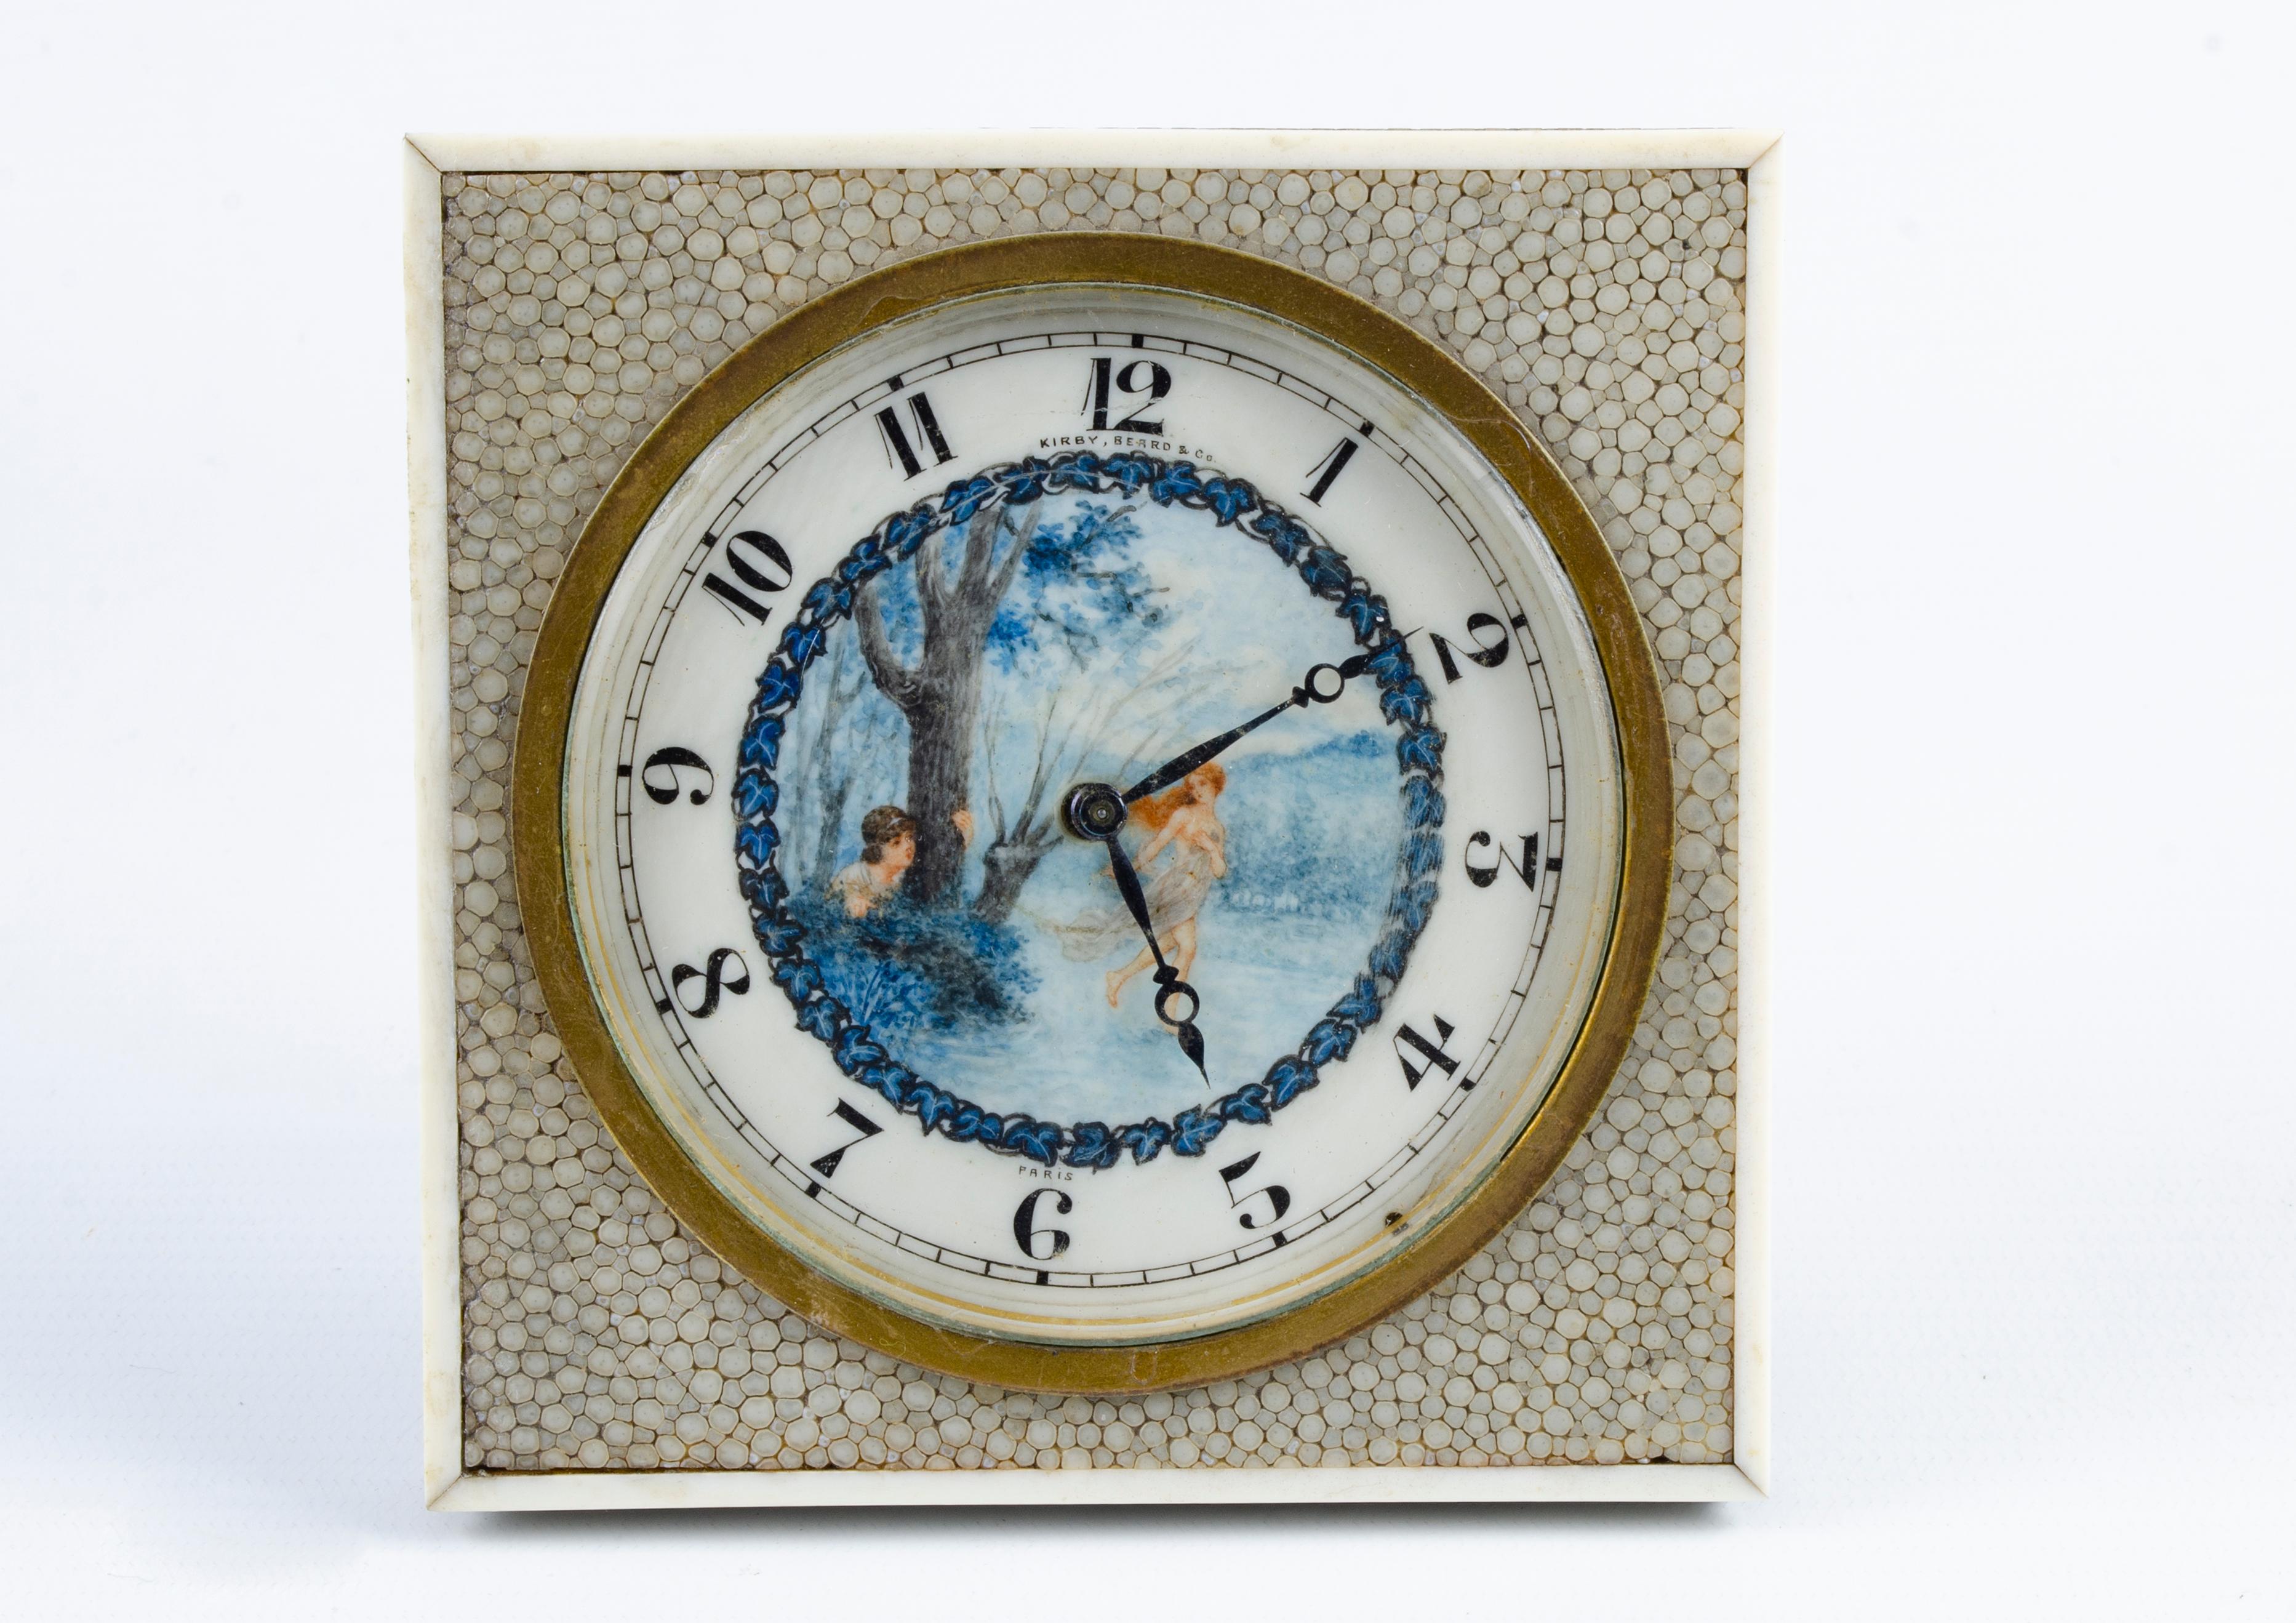 Art Deco table clock
Materials: Shagreen and bronze
French Origin Circa 1920
In the center it has an original painting (Scene voyyer)
Mark on its dial (Kirby Beard and Co Paris).